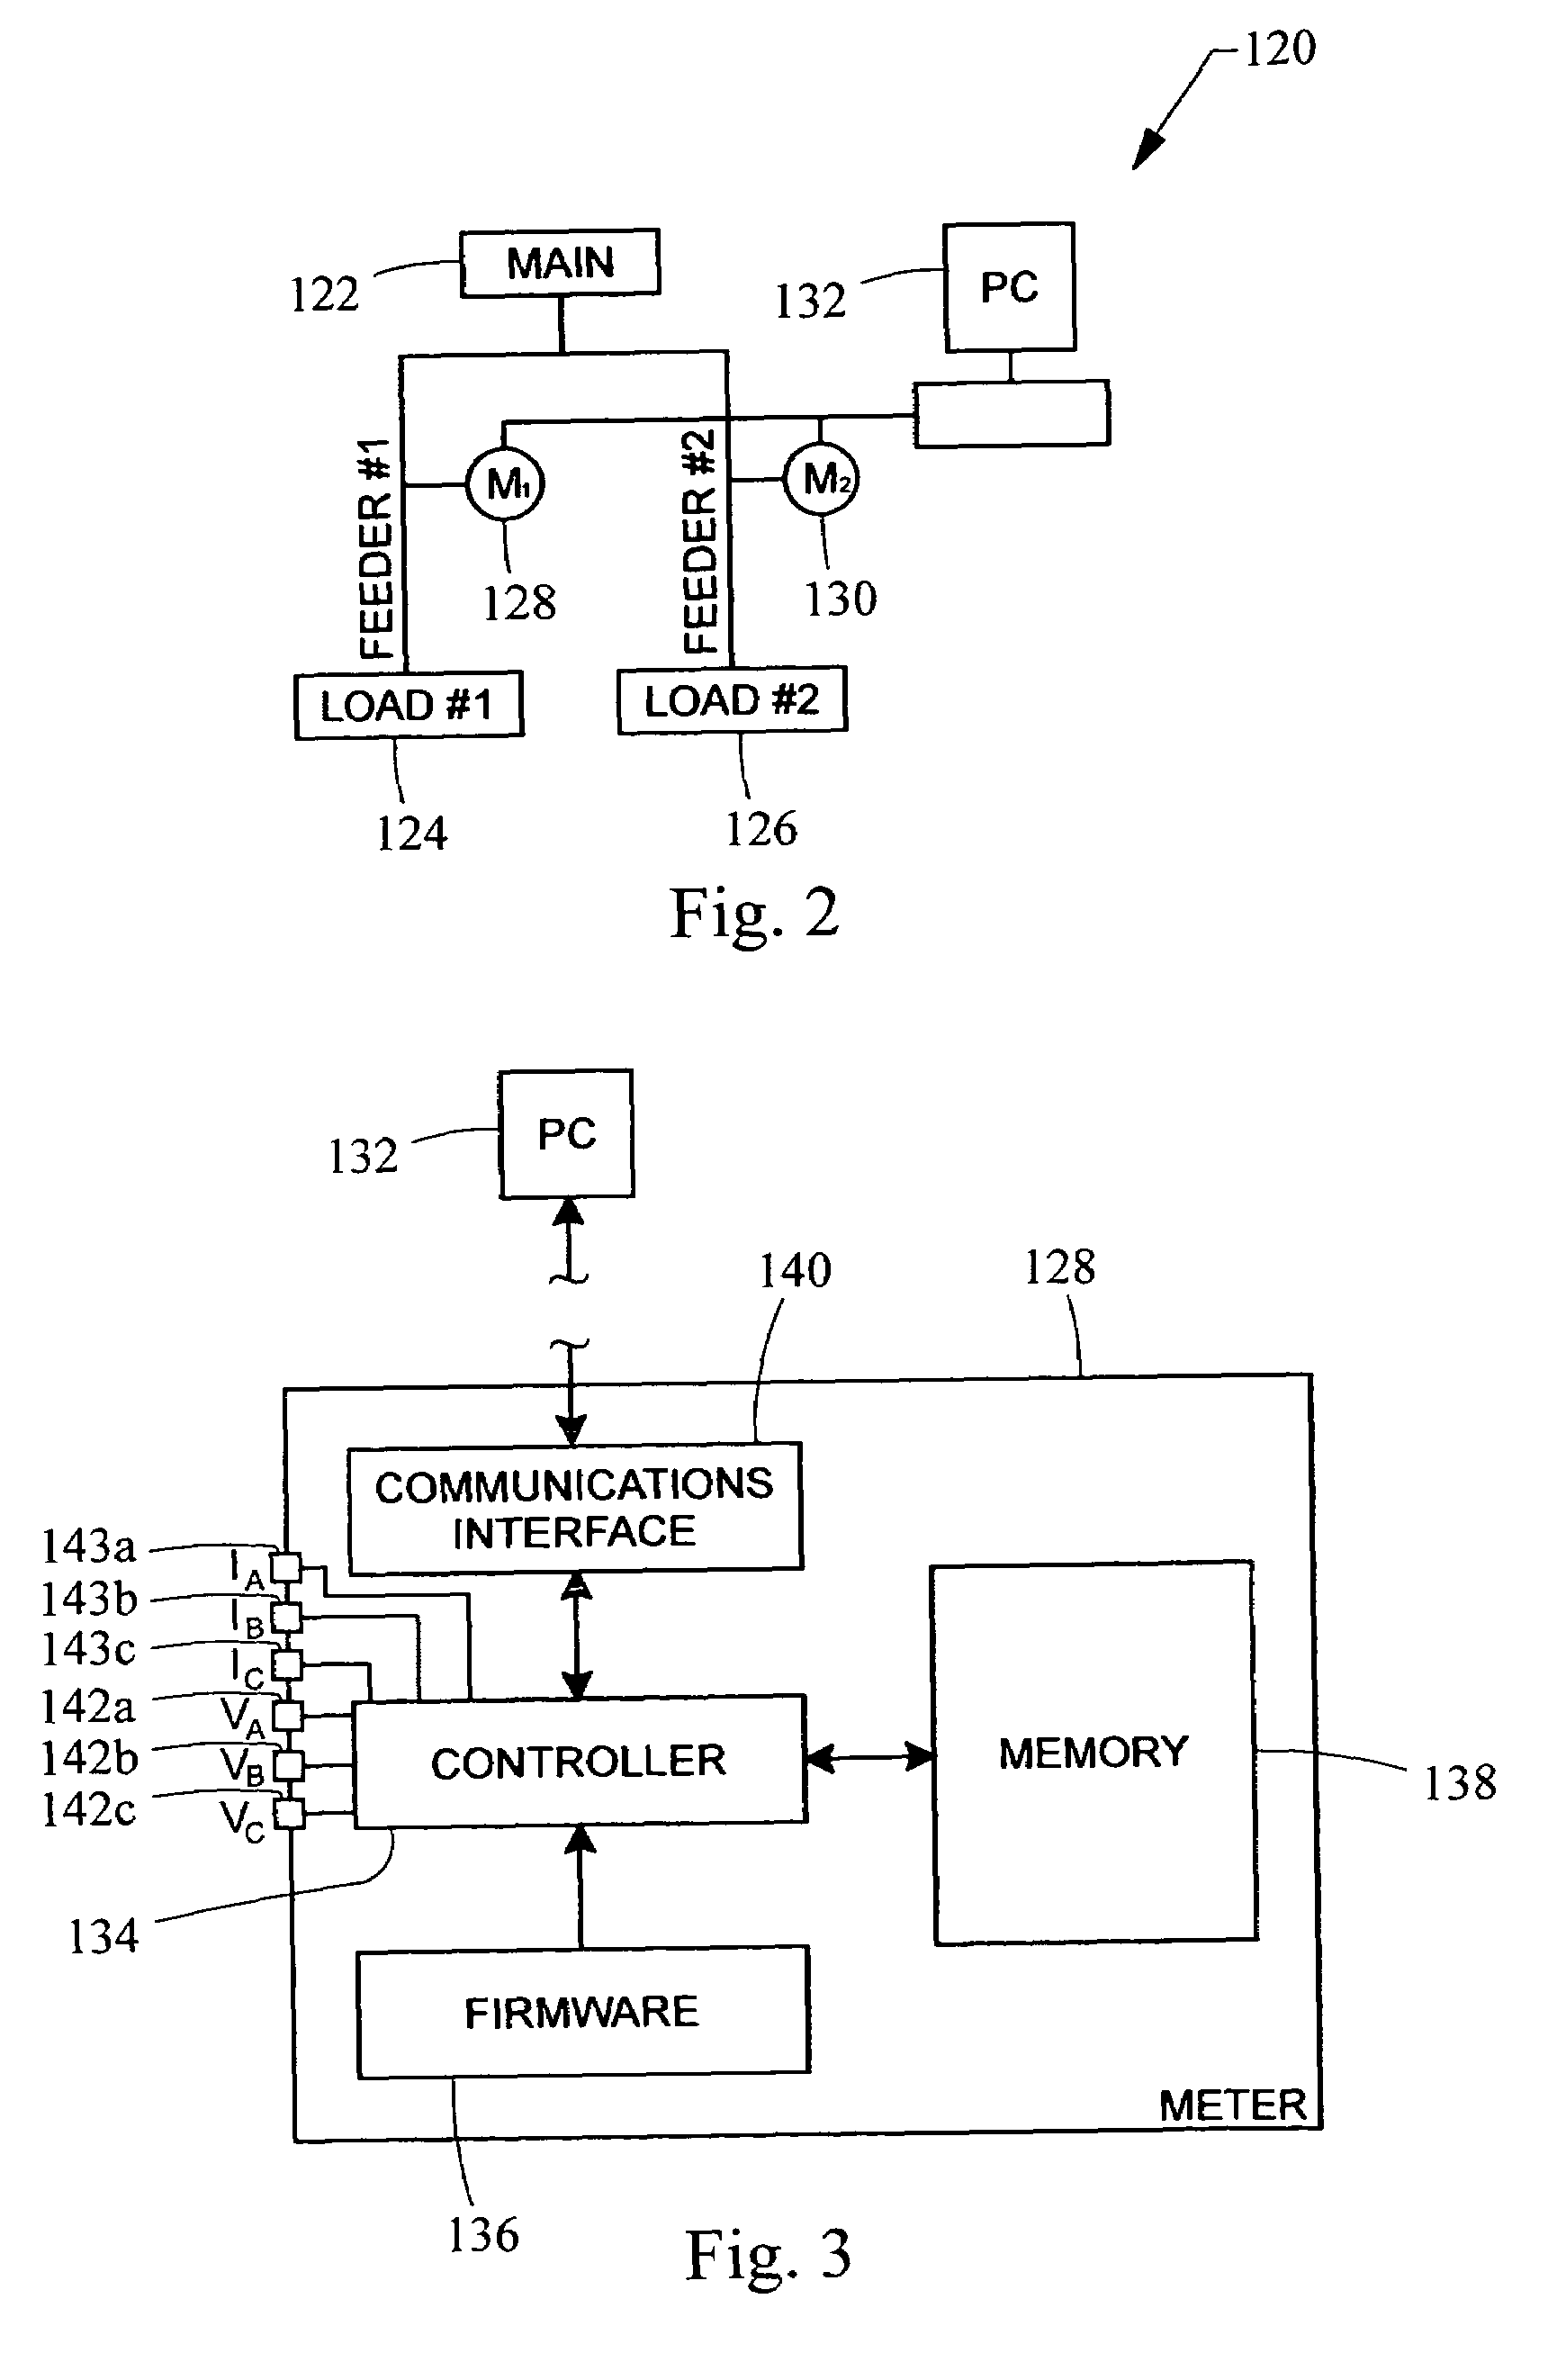 Automated precision alignment of data in a utility monitoring system